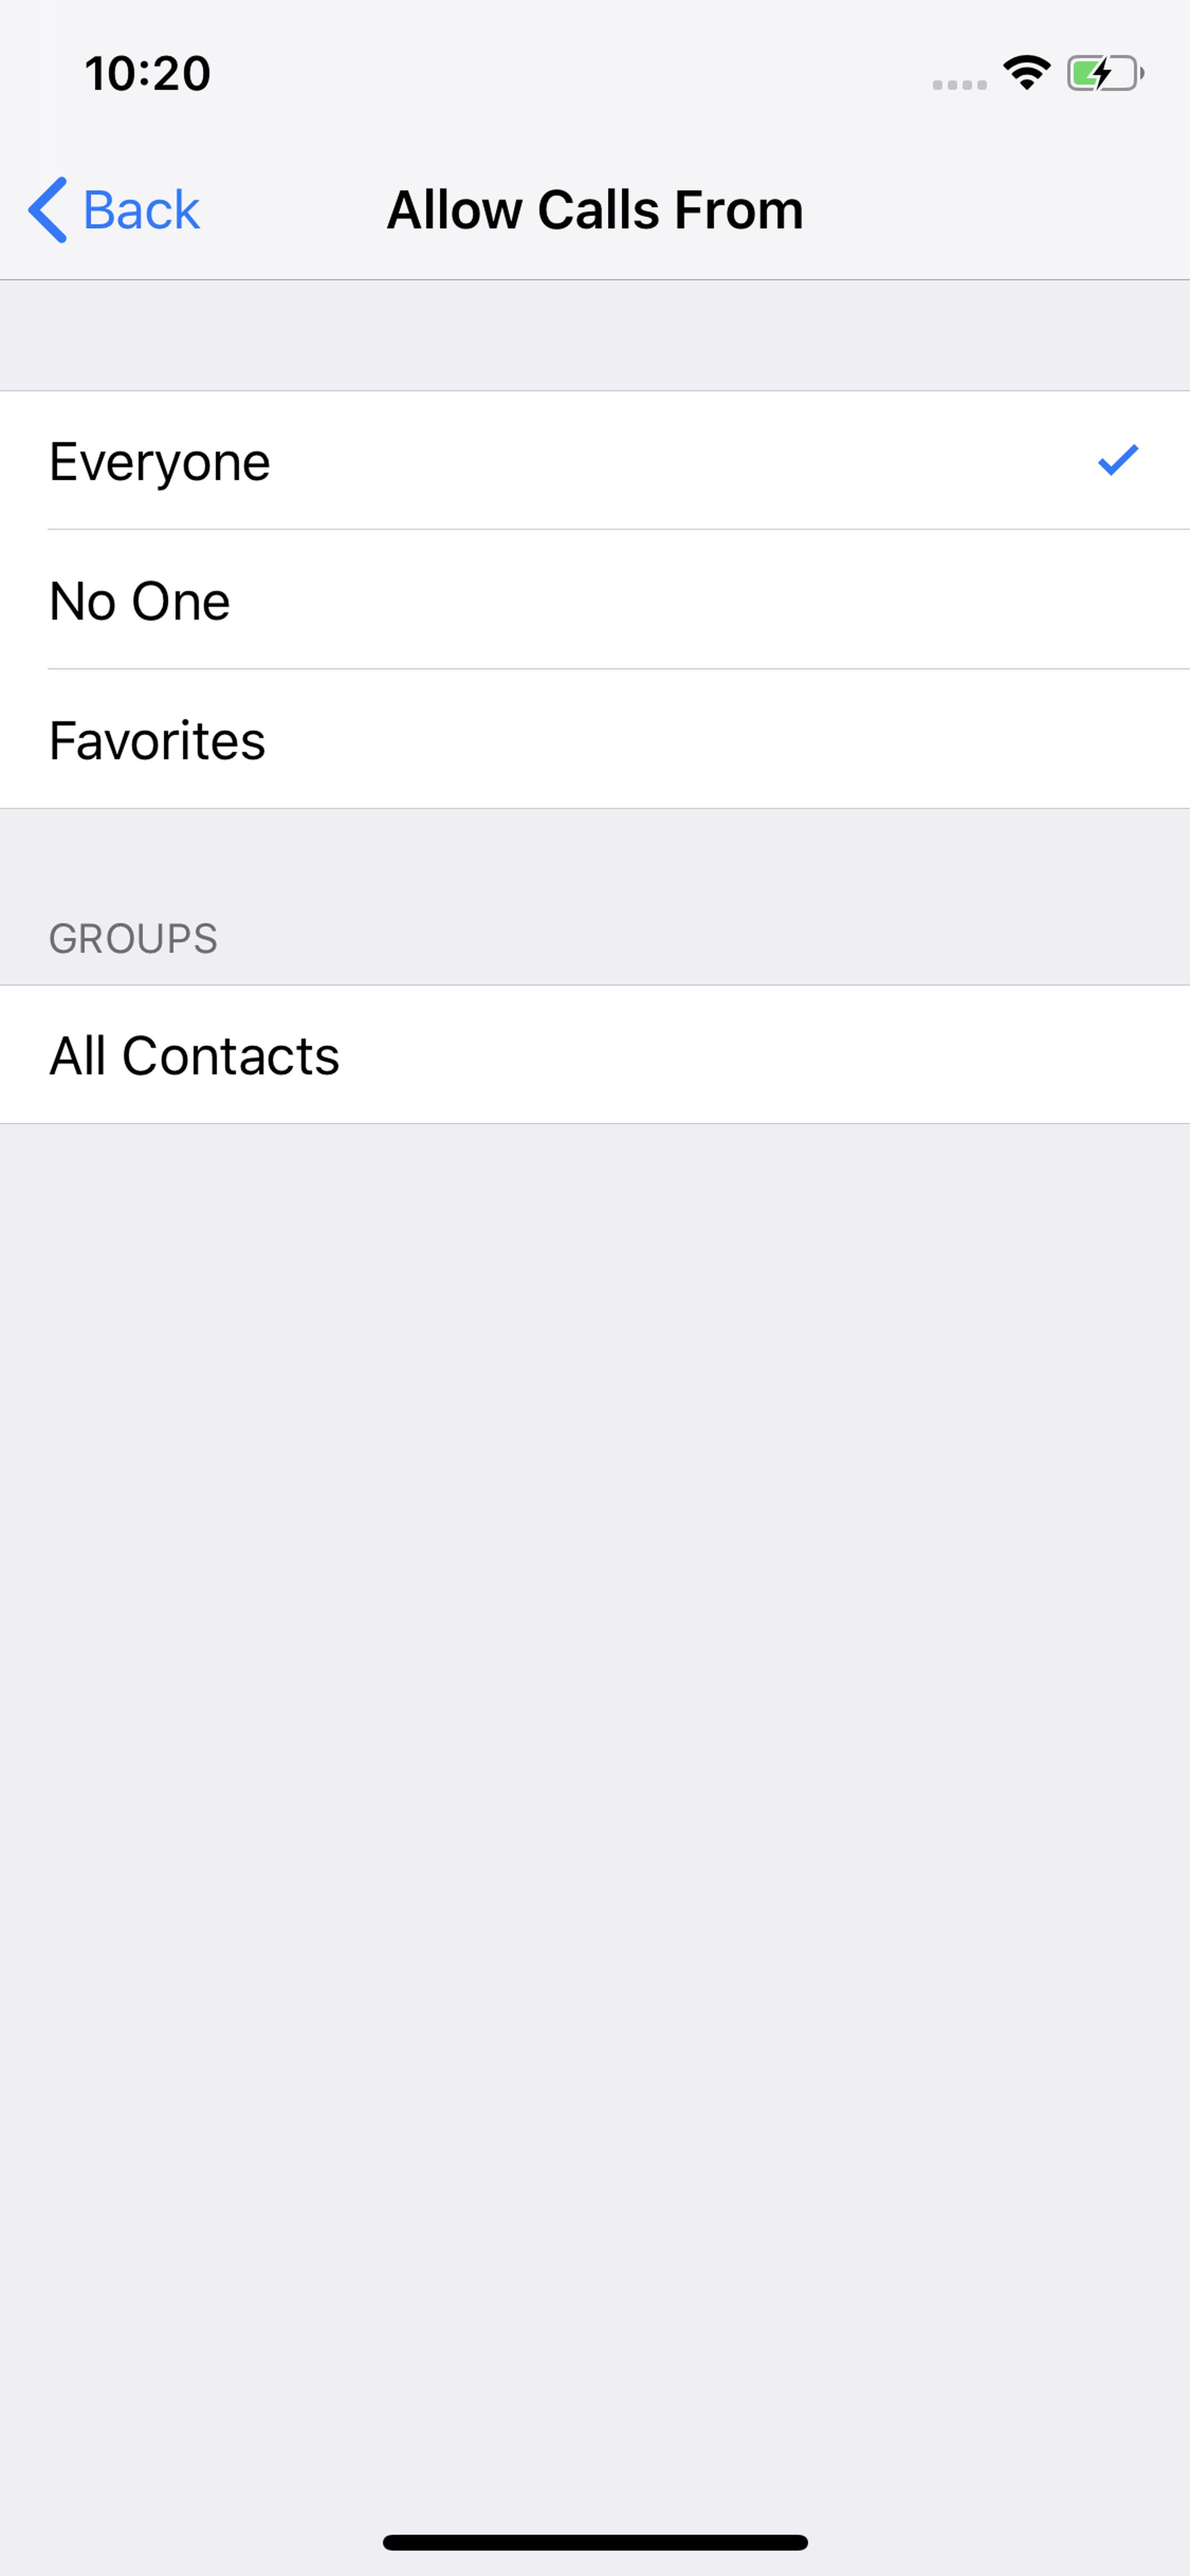 Do Not Disturb for iOS groups